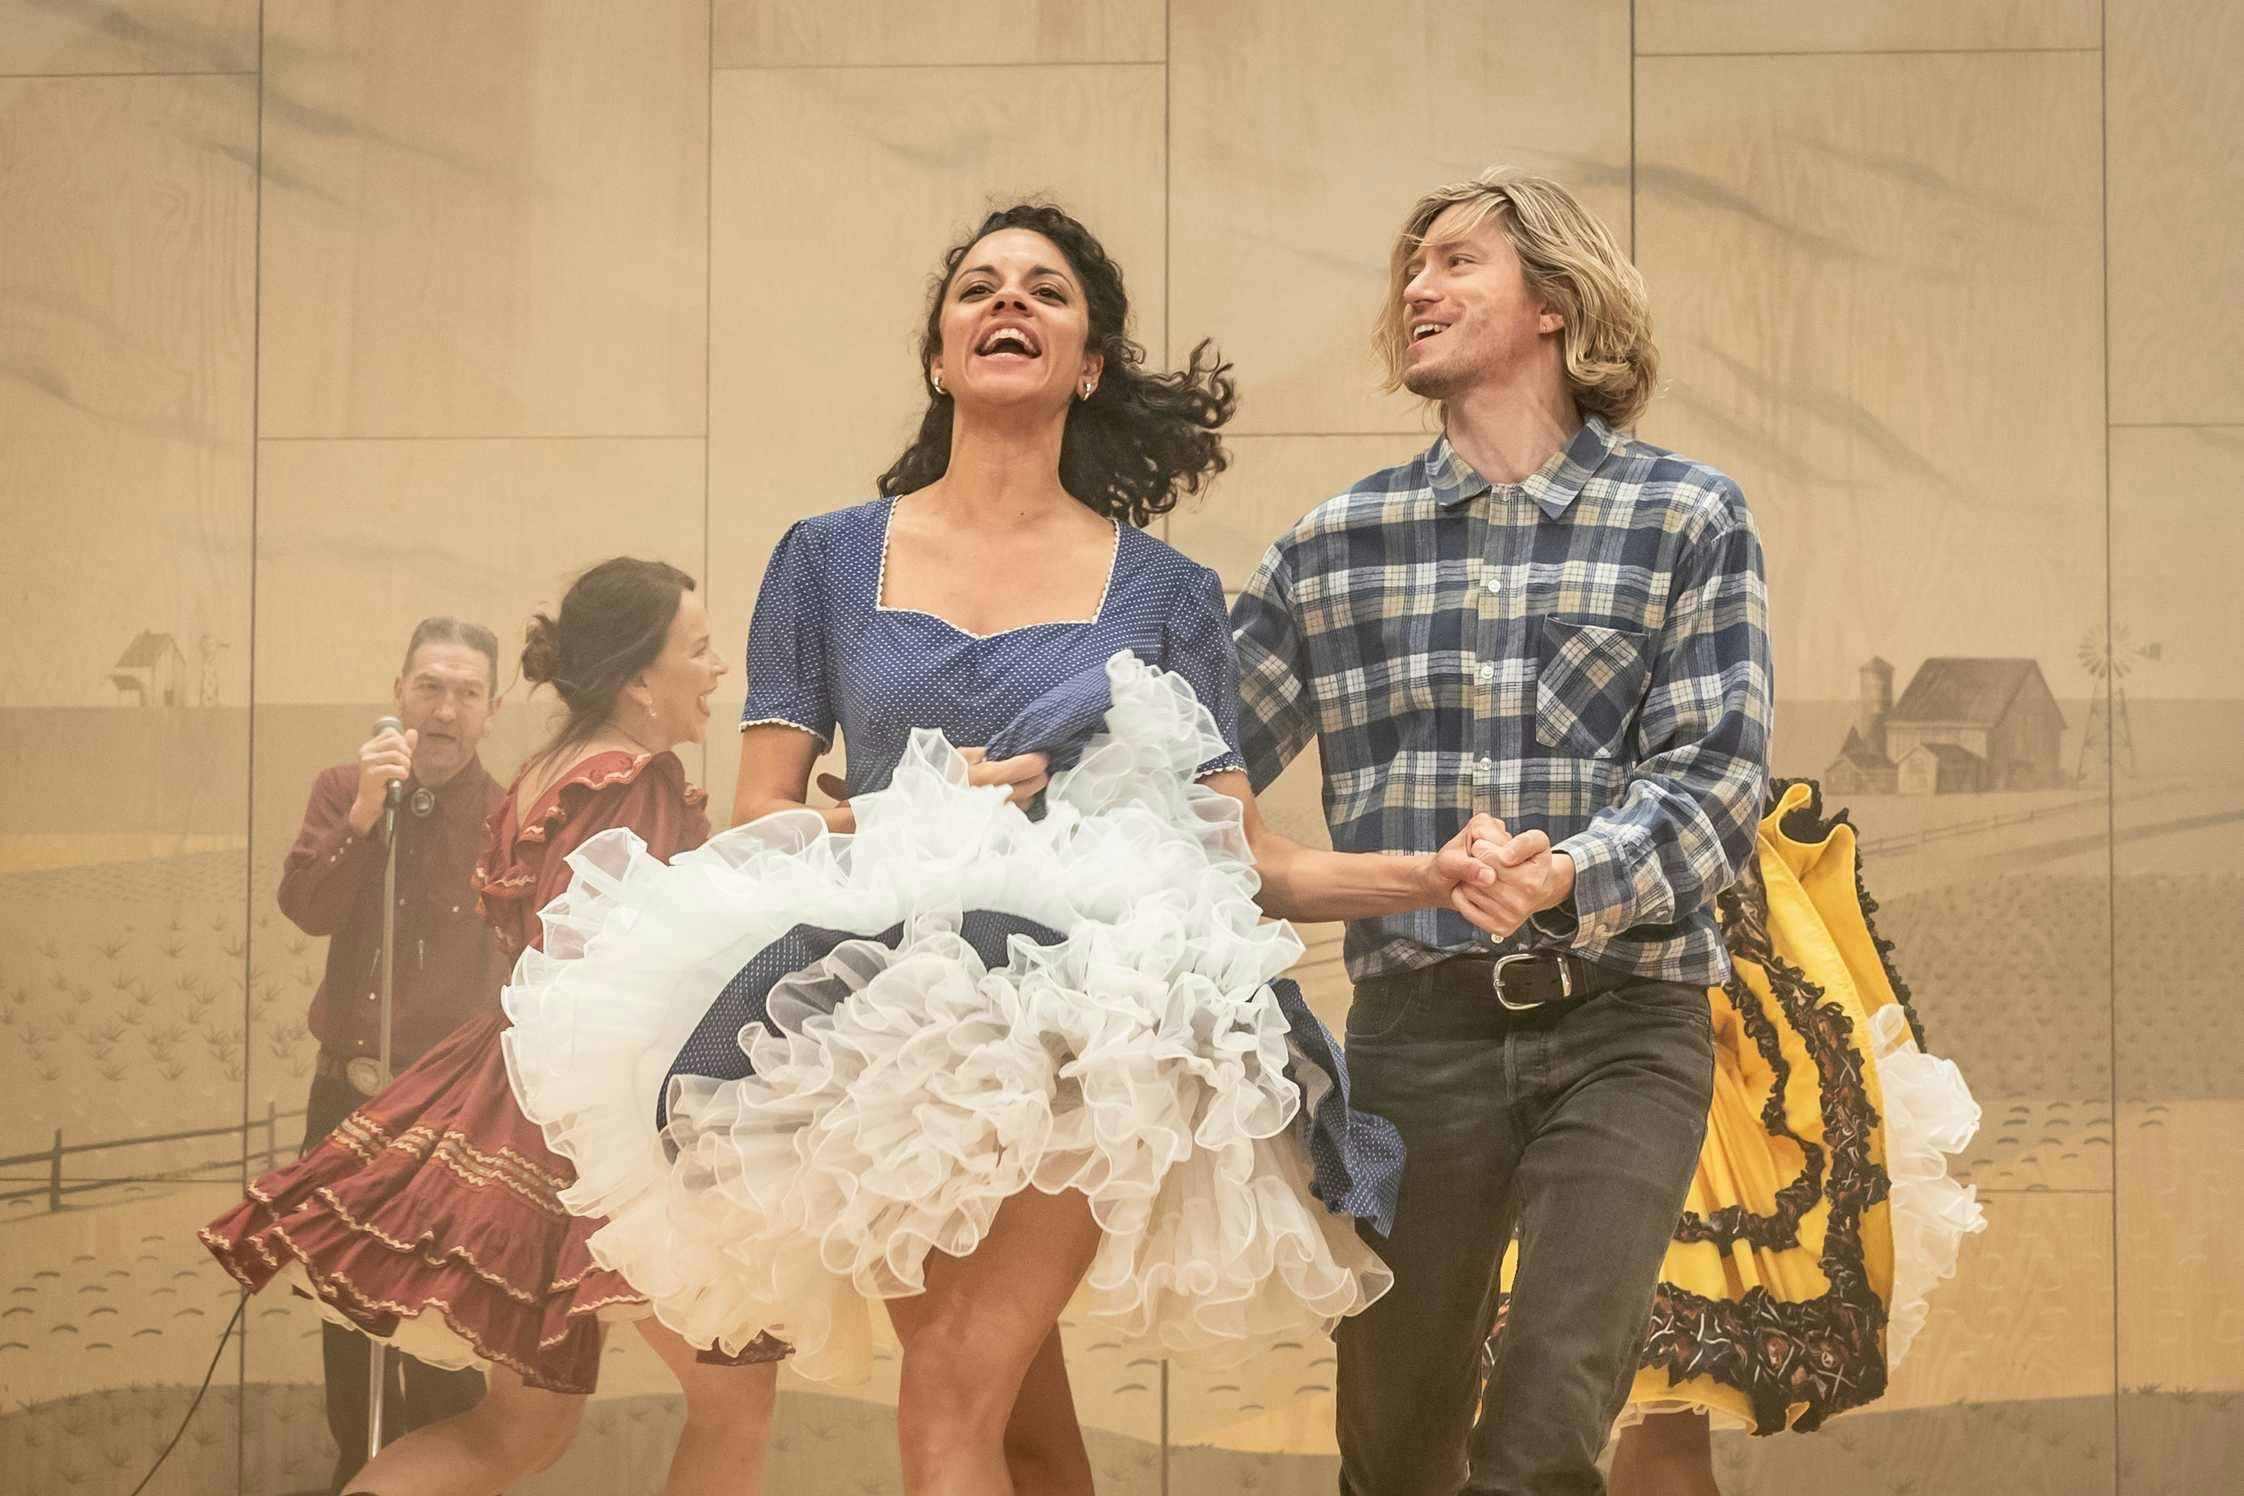 Oklahoma: The Musical - man and woman dancing together on stage